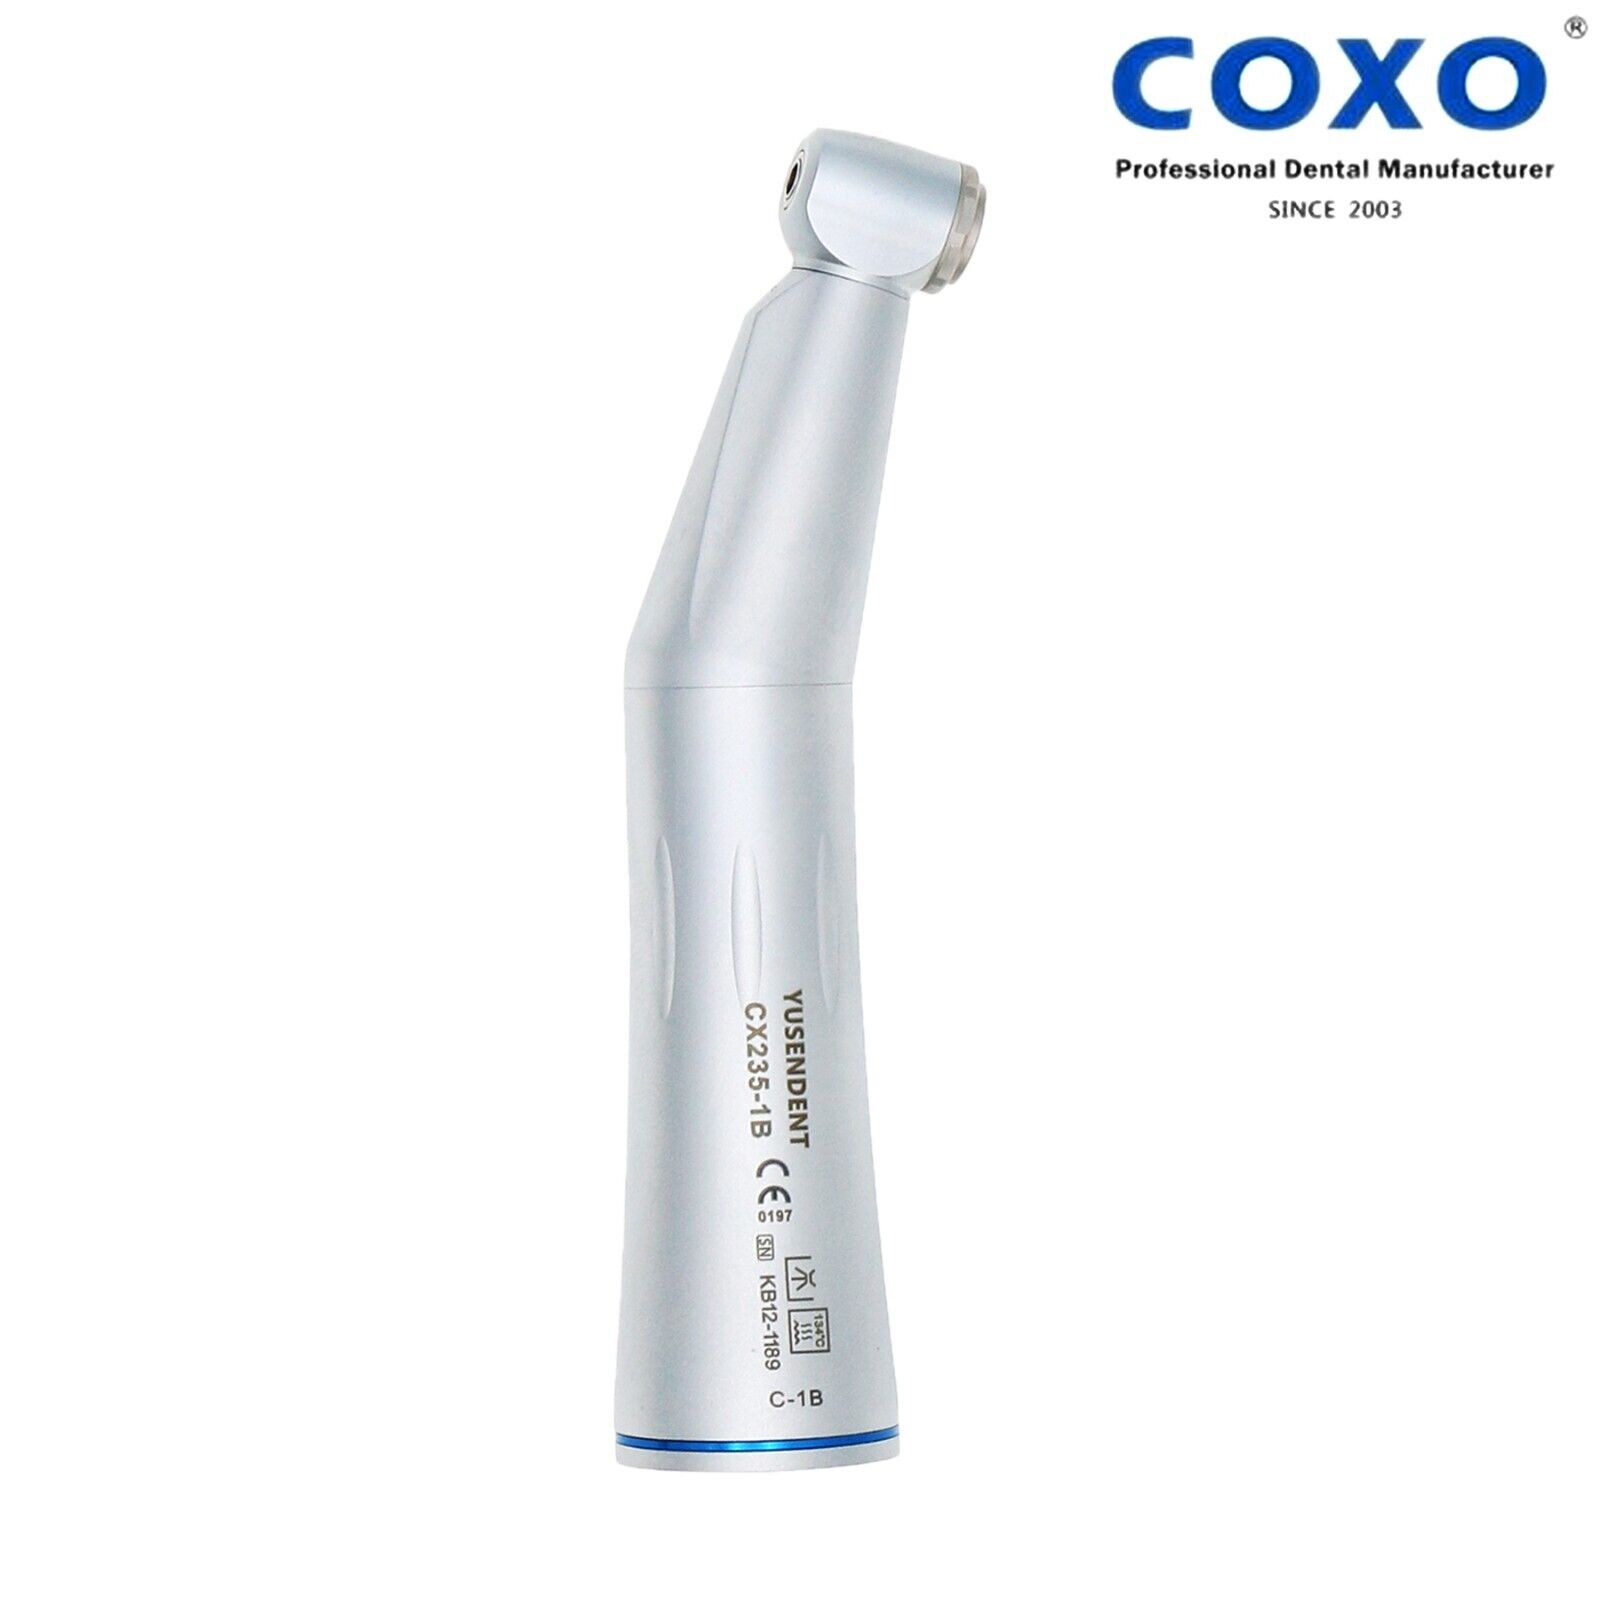 US COXO Dental Contra Angle 1:1 LED Low Speed Handpiece Inner Water Fiber Optic